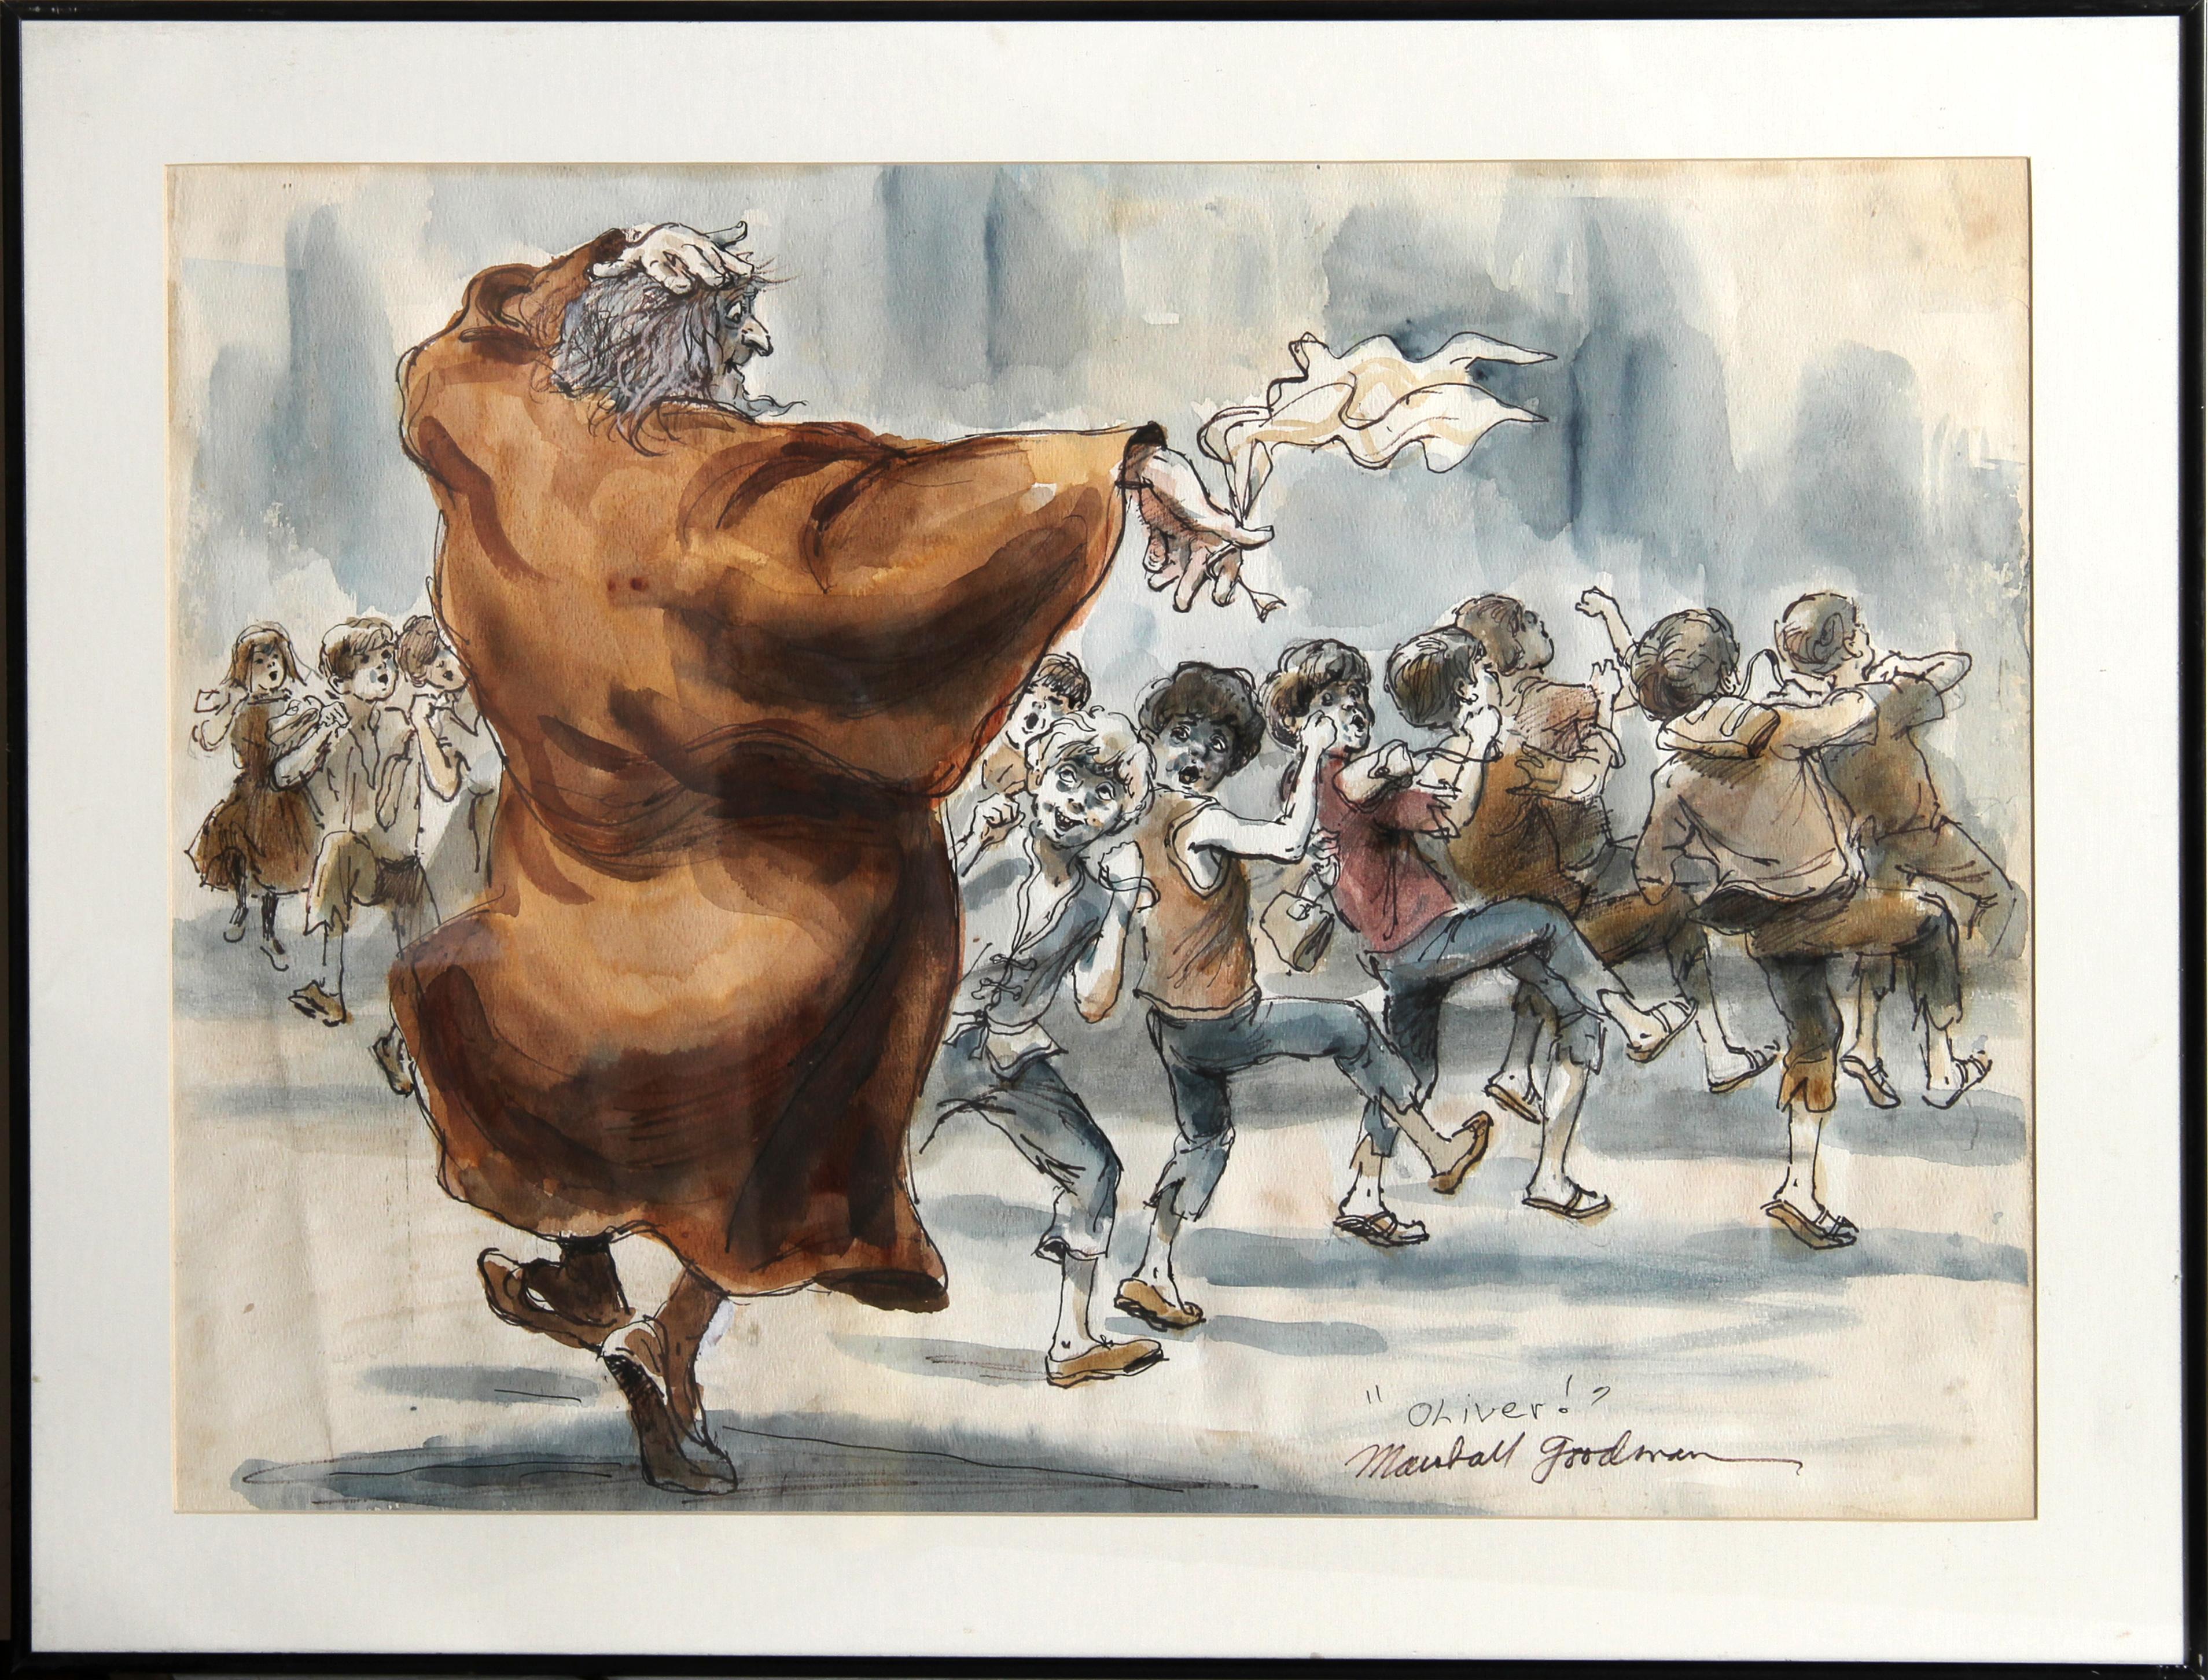 Fagin Teaching Boys to Steal, Original Illustration from Oliver